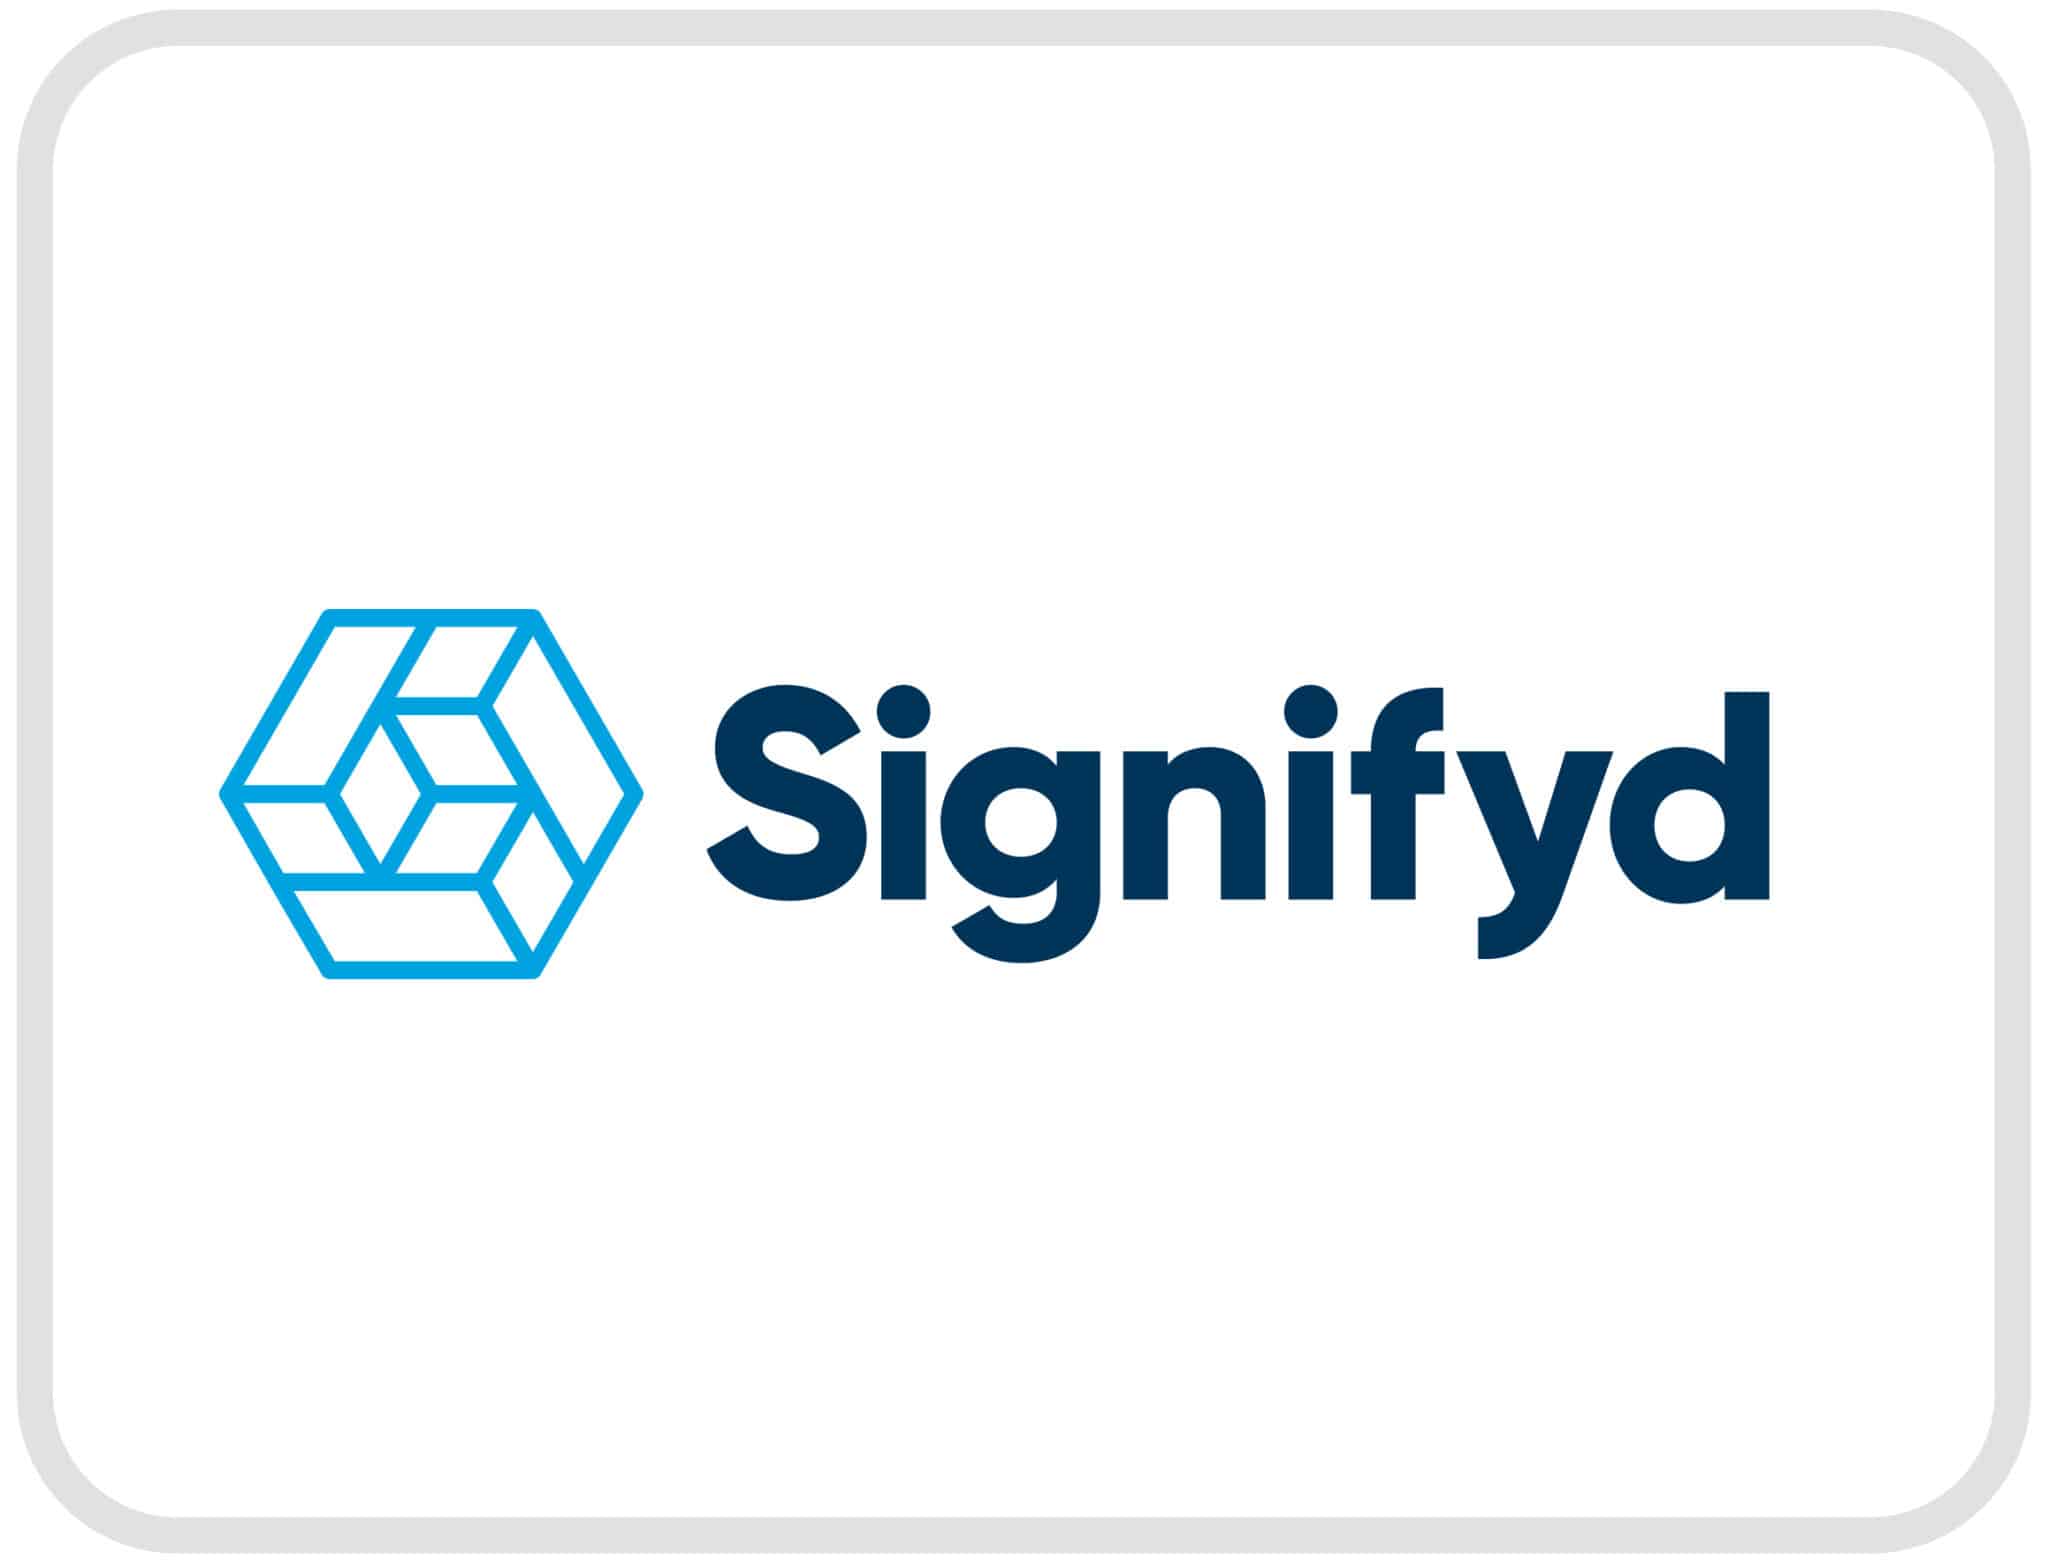 This is the Signifyd logo